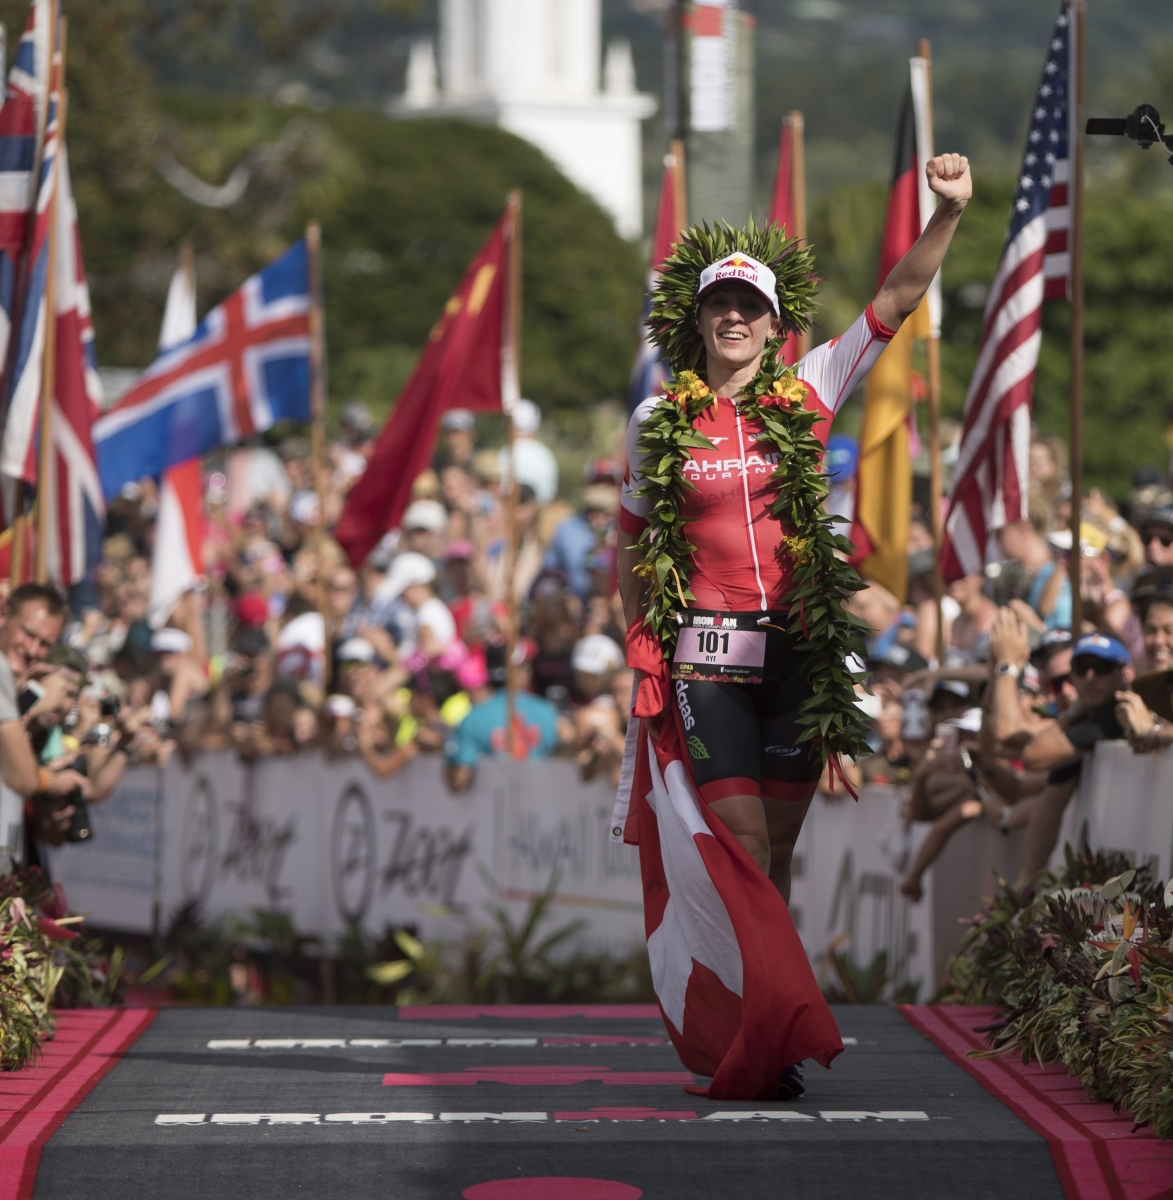 epa05577342 Daniela Ryf of Switzerland celebrates after crossing the finish line in the Ironman World Championship triathlon competition, in Hawaii, USA, 08 October 2016. Ryf successfully defended her title as the women's champion with an overall time of 8 hours, 46 minutes and 46 seconds.  EPA/BRUCE OMORI USA HAWAII IRONMAN